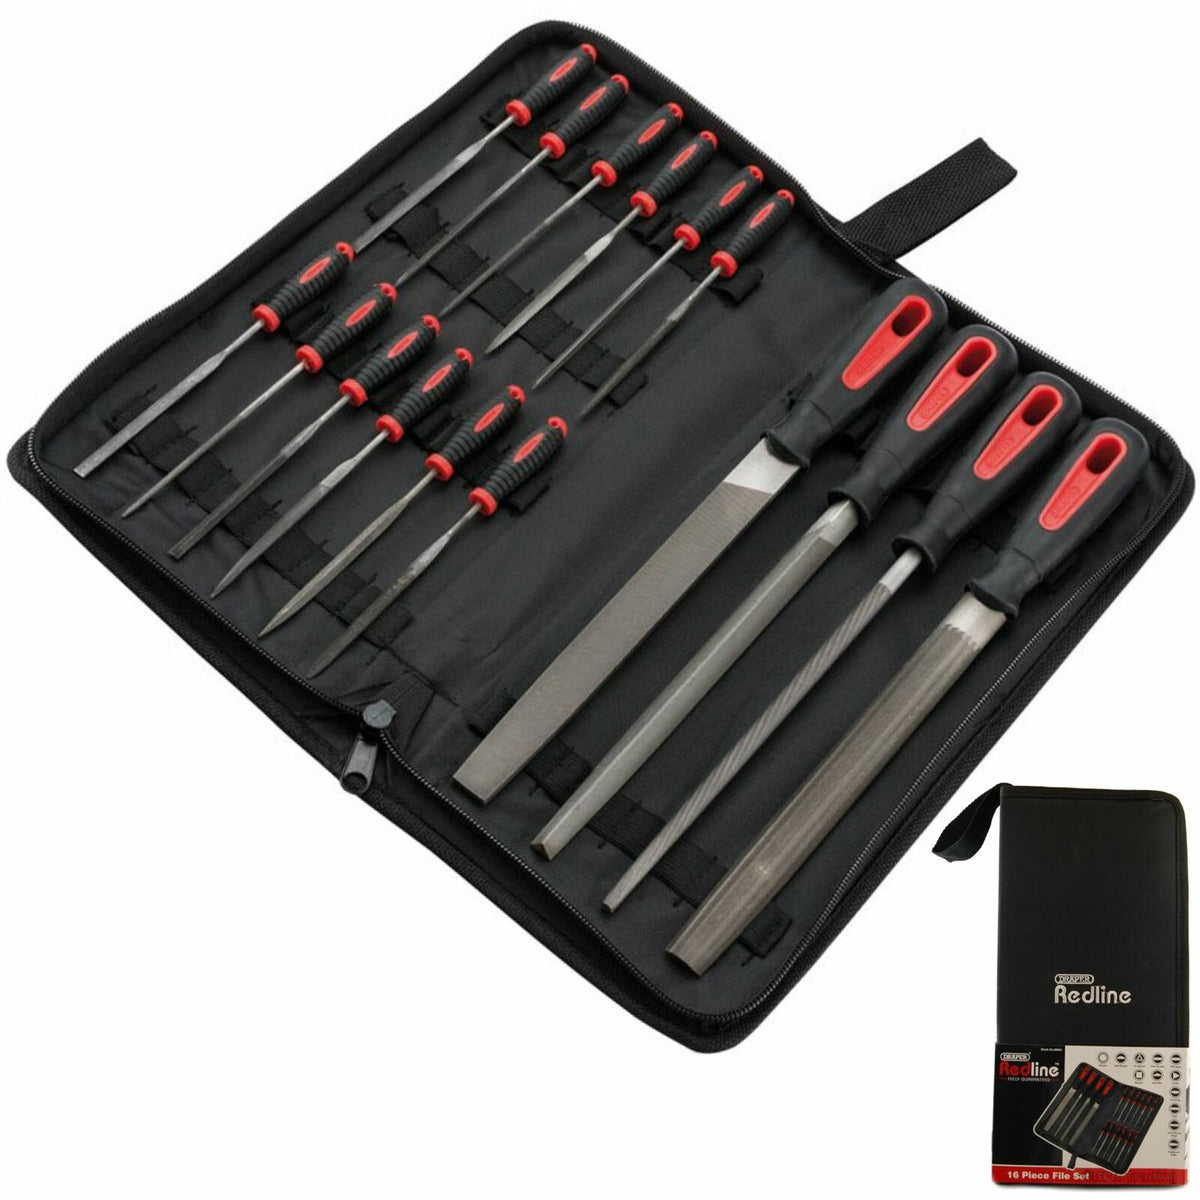 Draper Engineers Hand Needle File Tool Set with Black Canvas Carrying Case 16 Pc